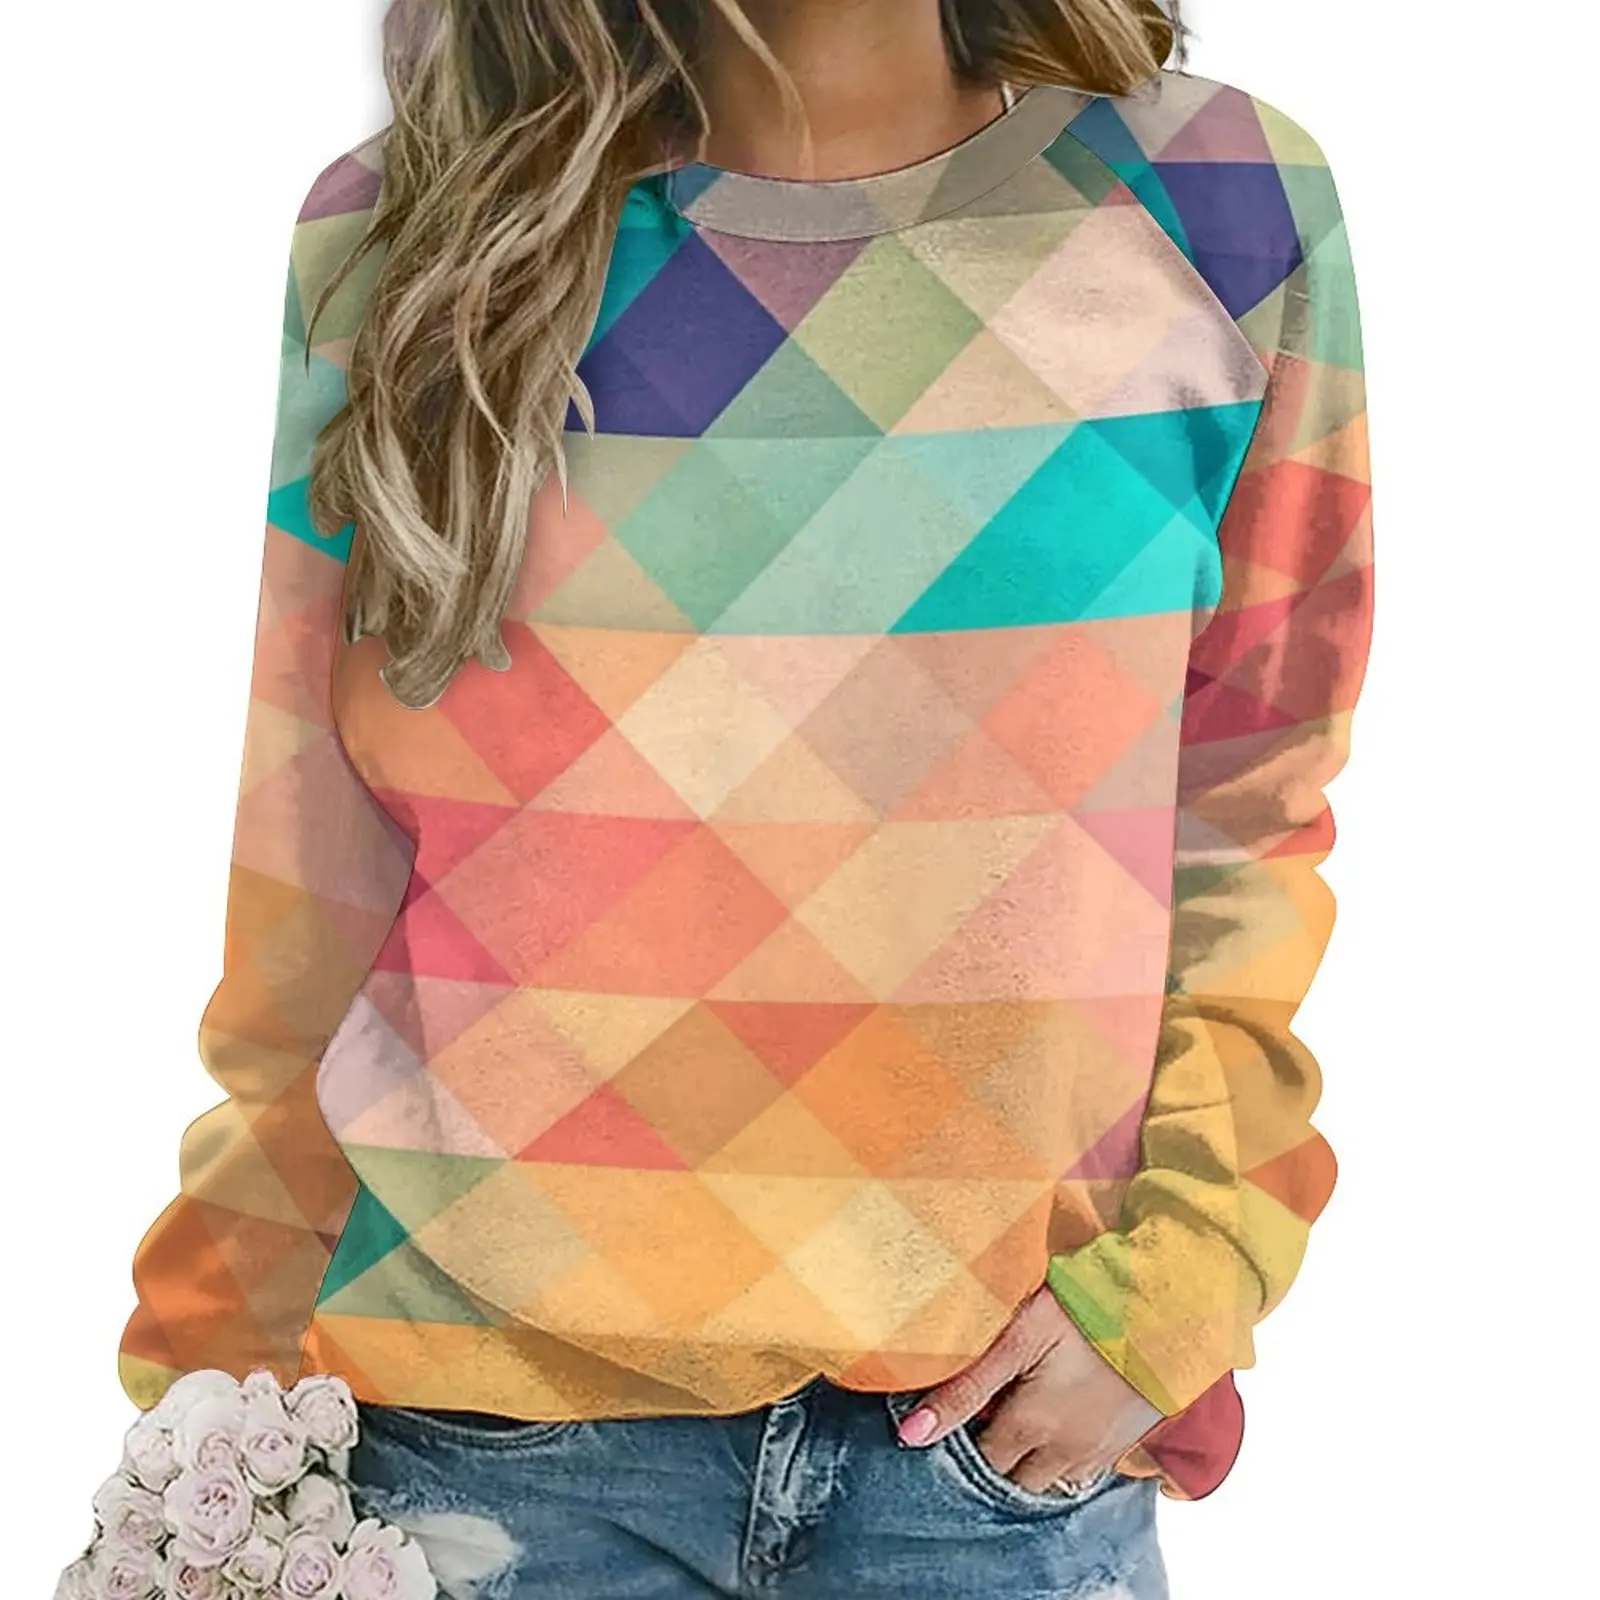 

Pastel Geometry Hoodies Womens Ombre Shapes Print Korean Fashion Casual Hoodie Spring Long Sleeve Cute Design Tops Big Size 3XL